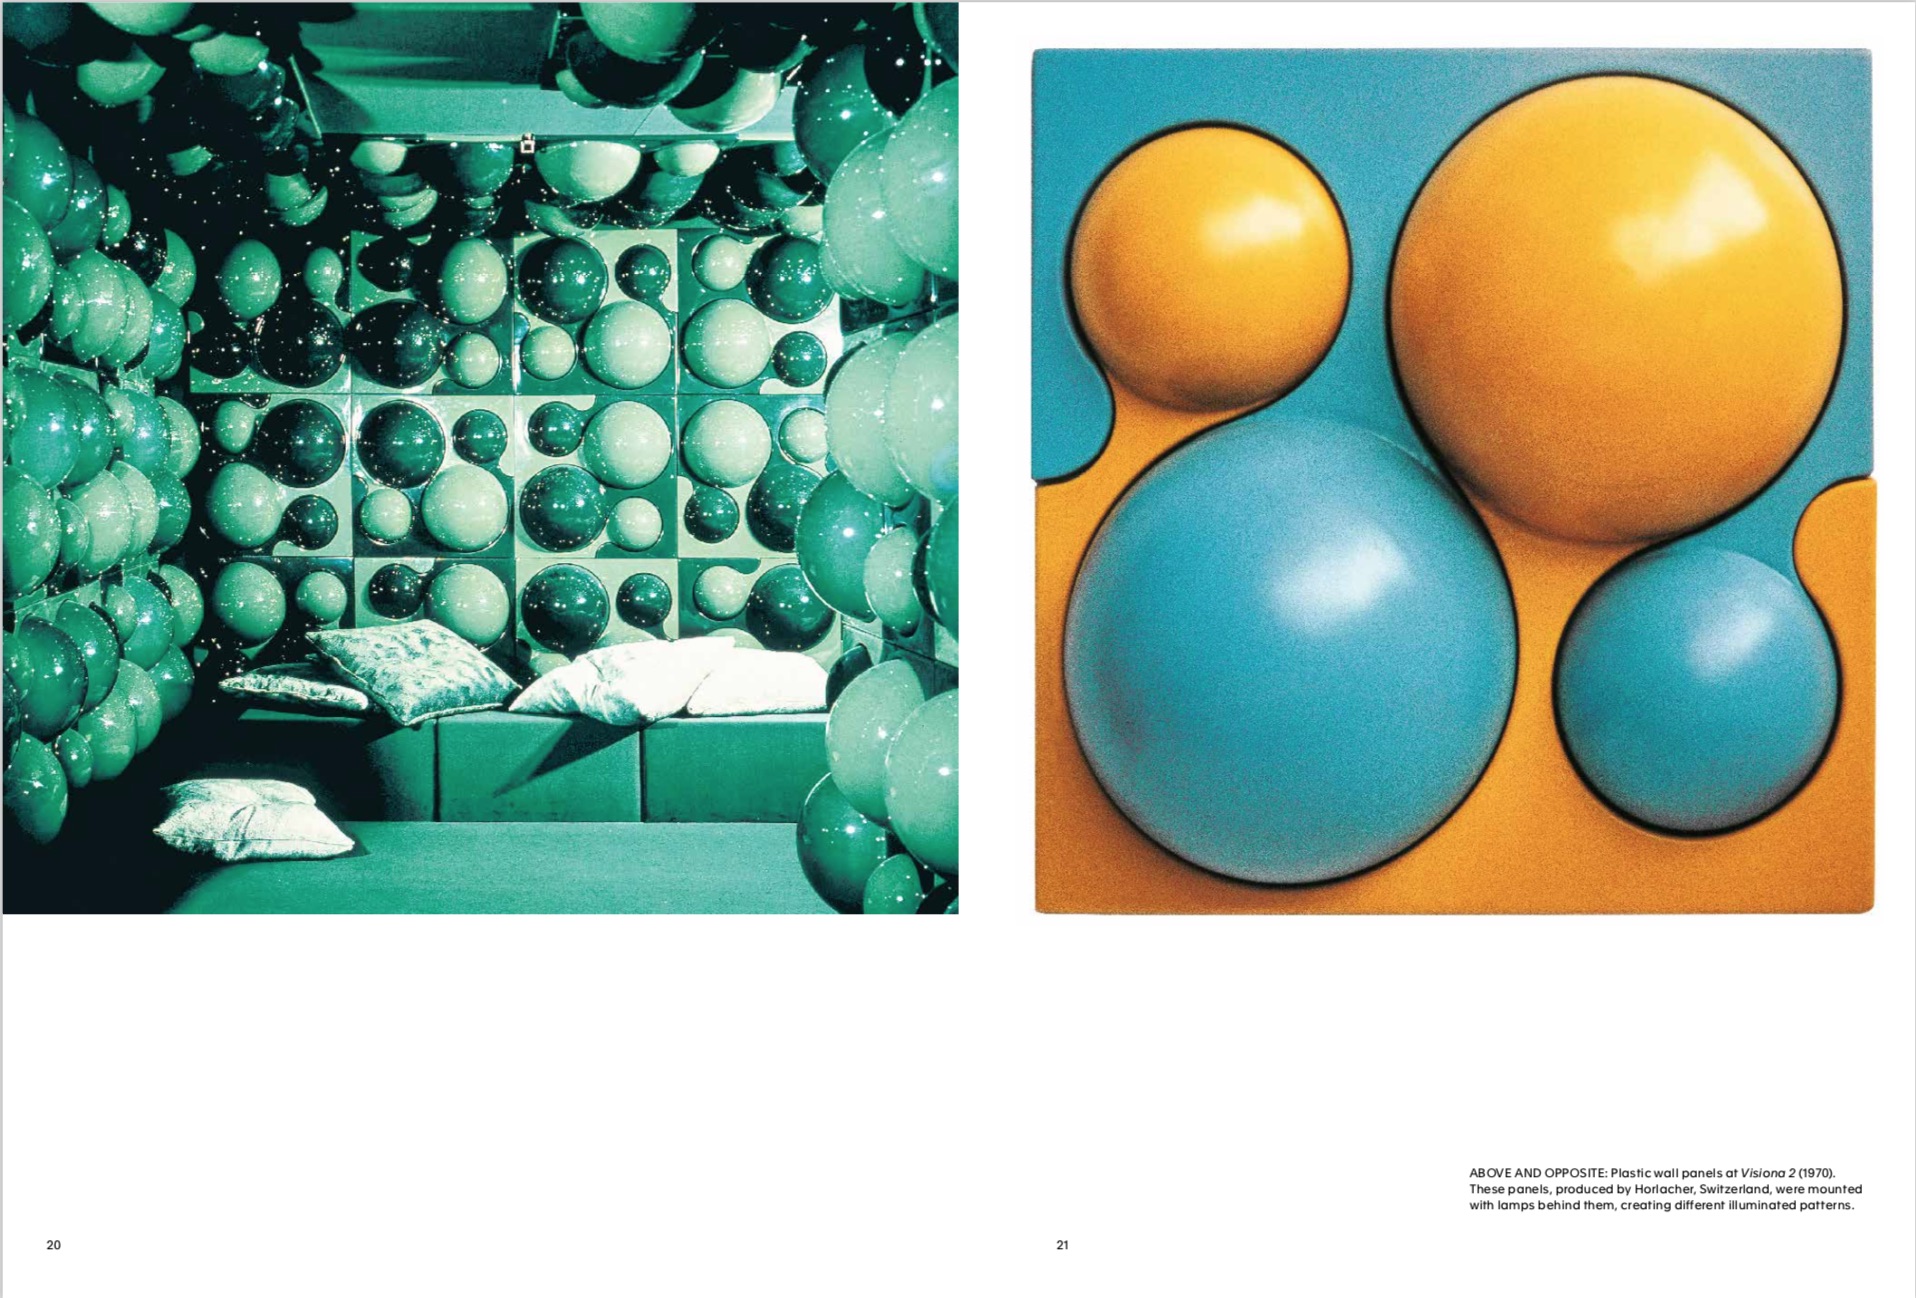 By Ida Engholm and Anders Michelsen from Verner Panton copyright Phaidon 2018